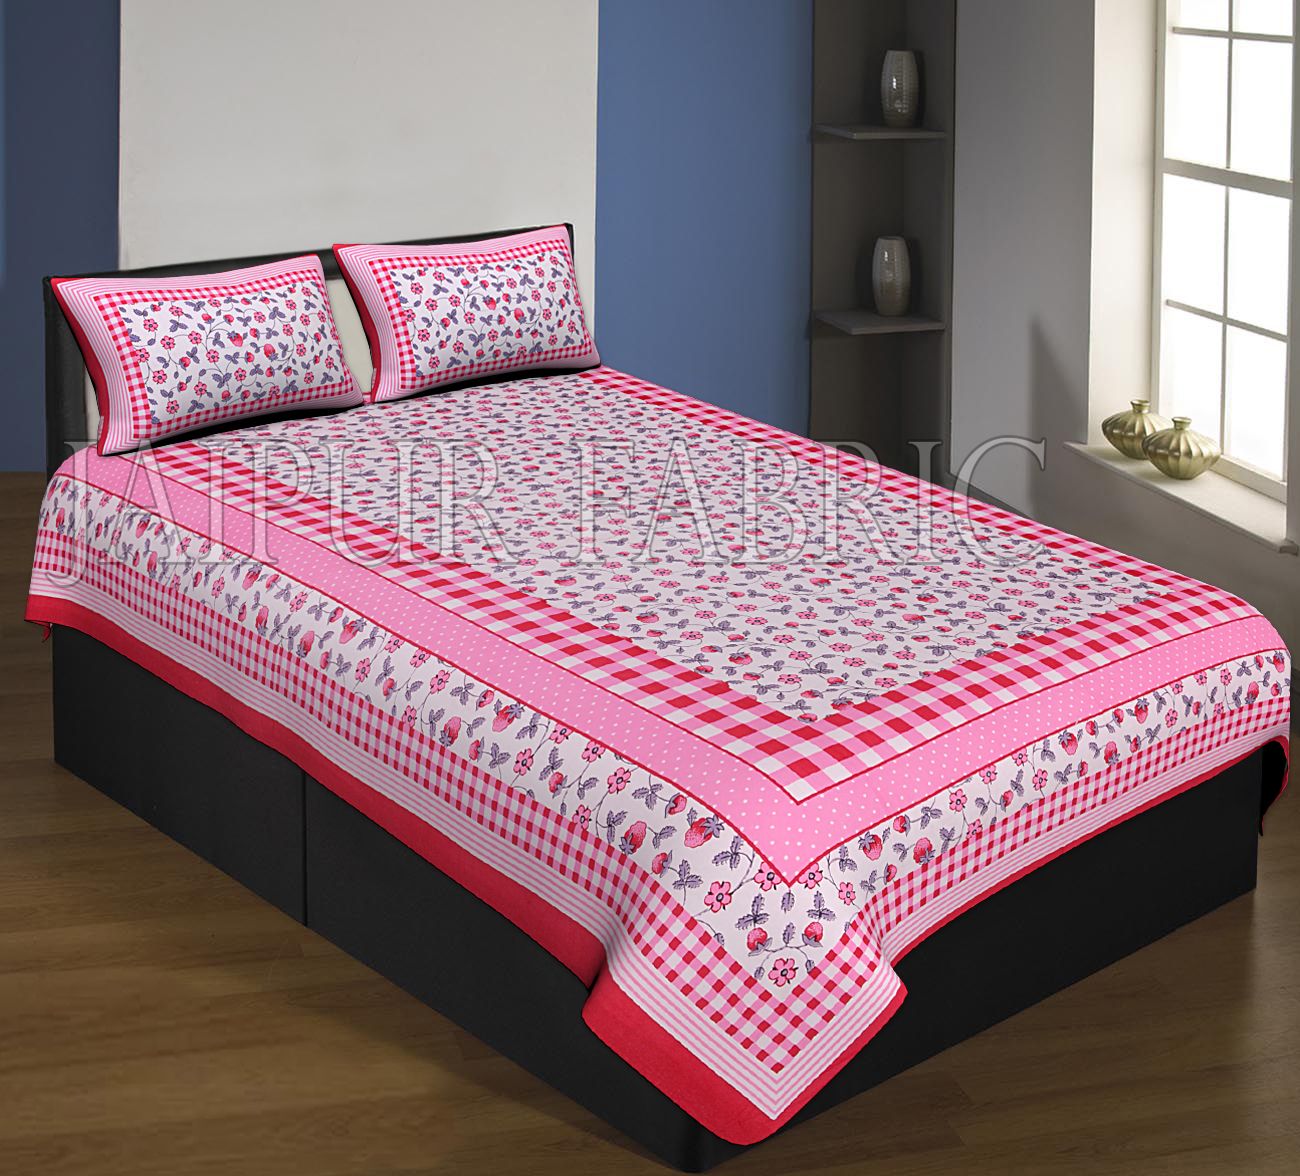 Red Boarder With Check Print And Dot Flower Pattern Single Bed Sheet With 2 Pillow Cover